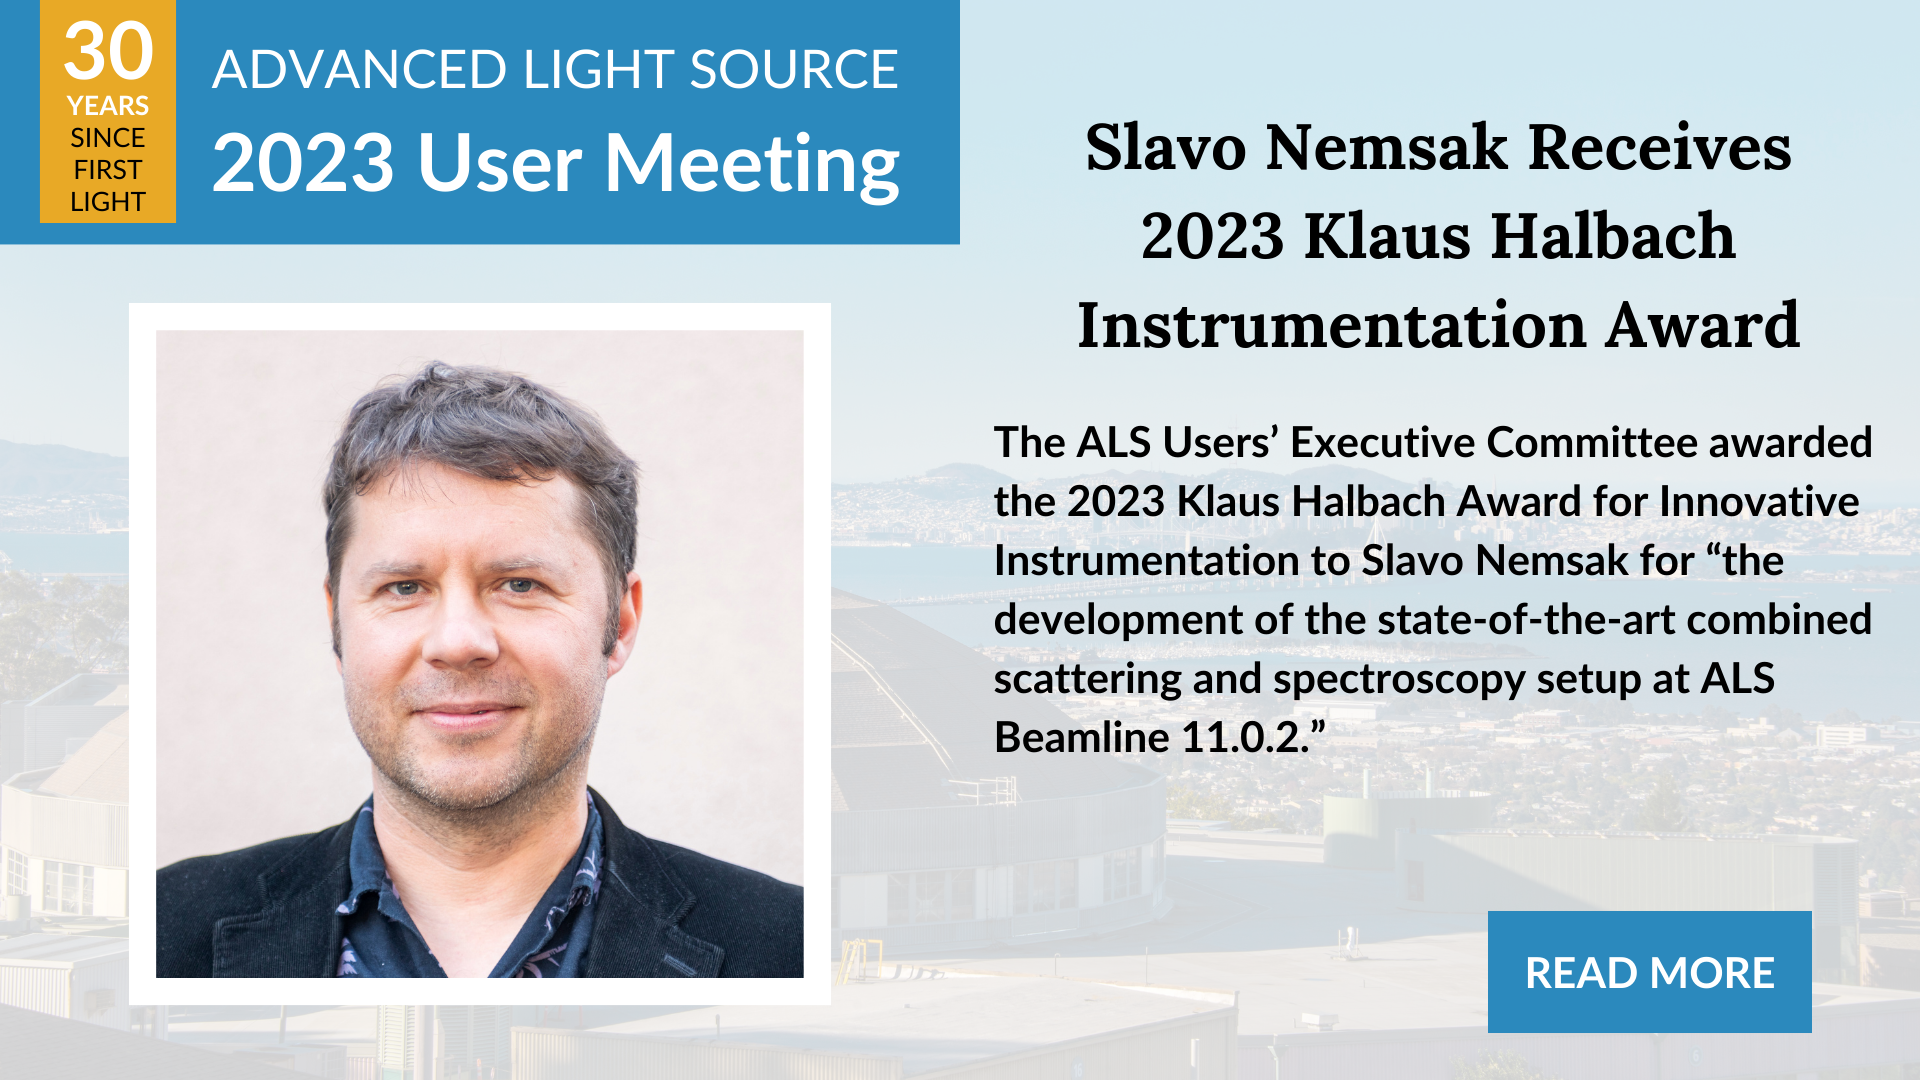 The ALS Users’ Executive Committee awarded the 2023 Klaus Halbach Award for Innovative Instrumentation to Slavo Nemsak for “the development of the state-of-the-art combined scattering and spectroscopy setup at ALS Beamline 11.0.2.”